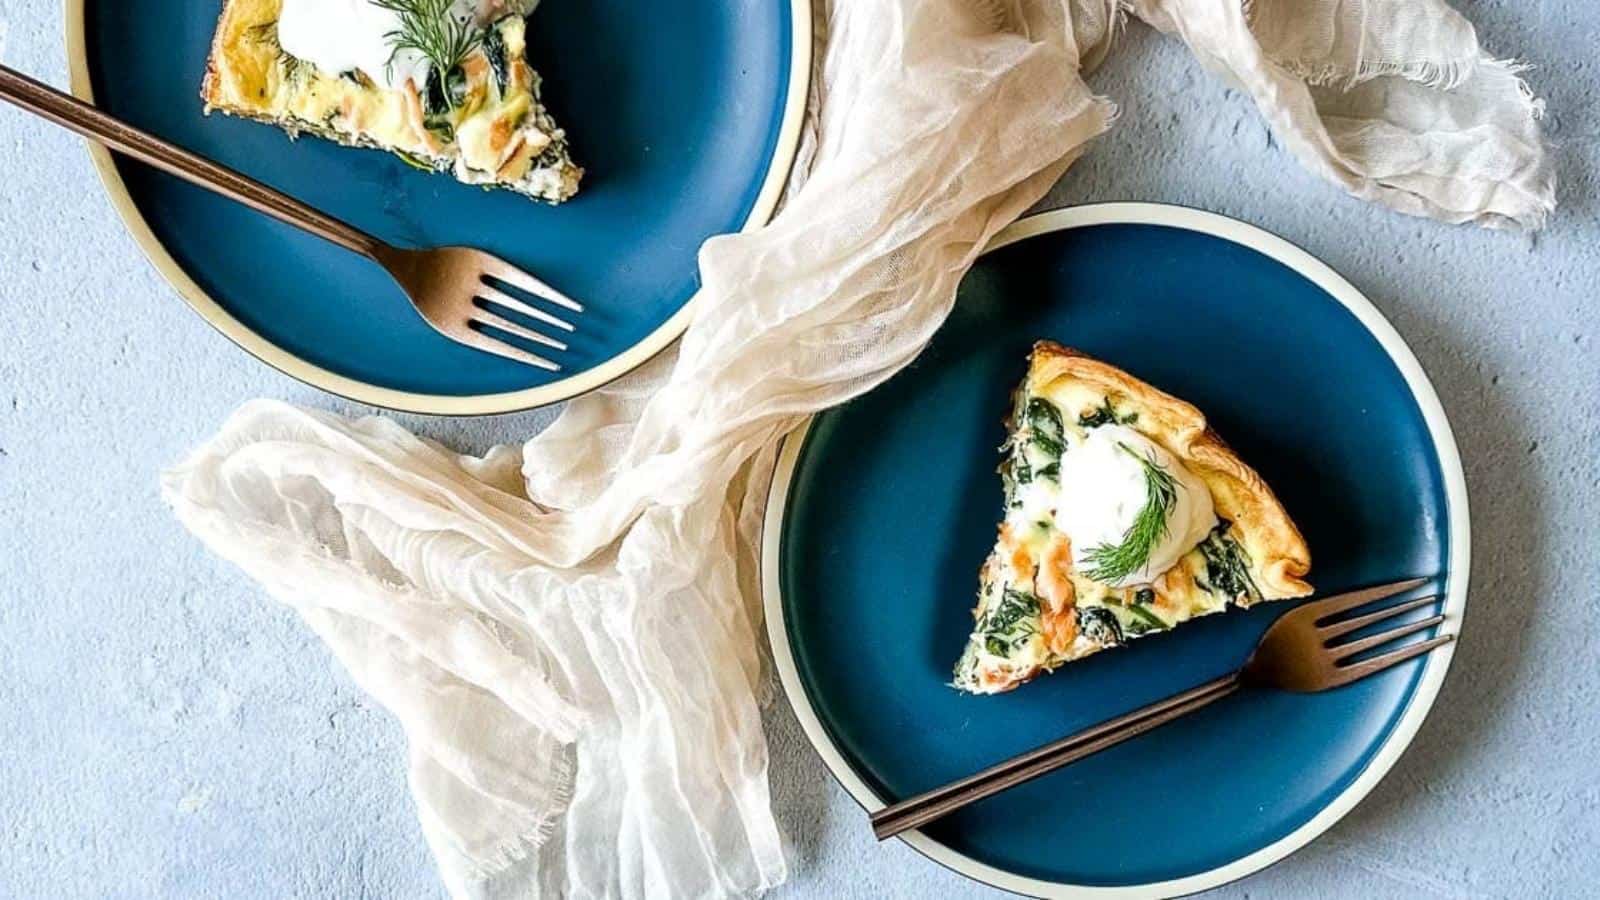 two slices of smoked salmon and spinach quiche on dark blue plates.